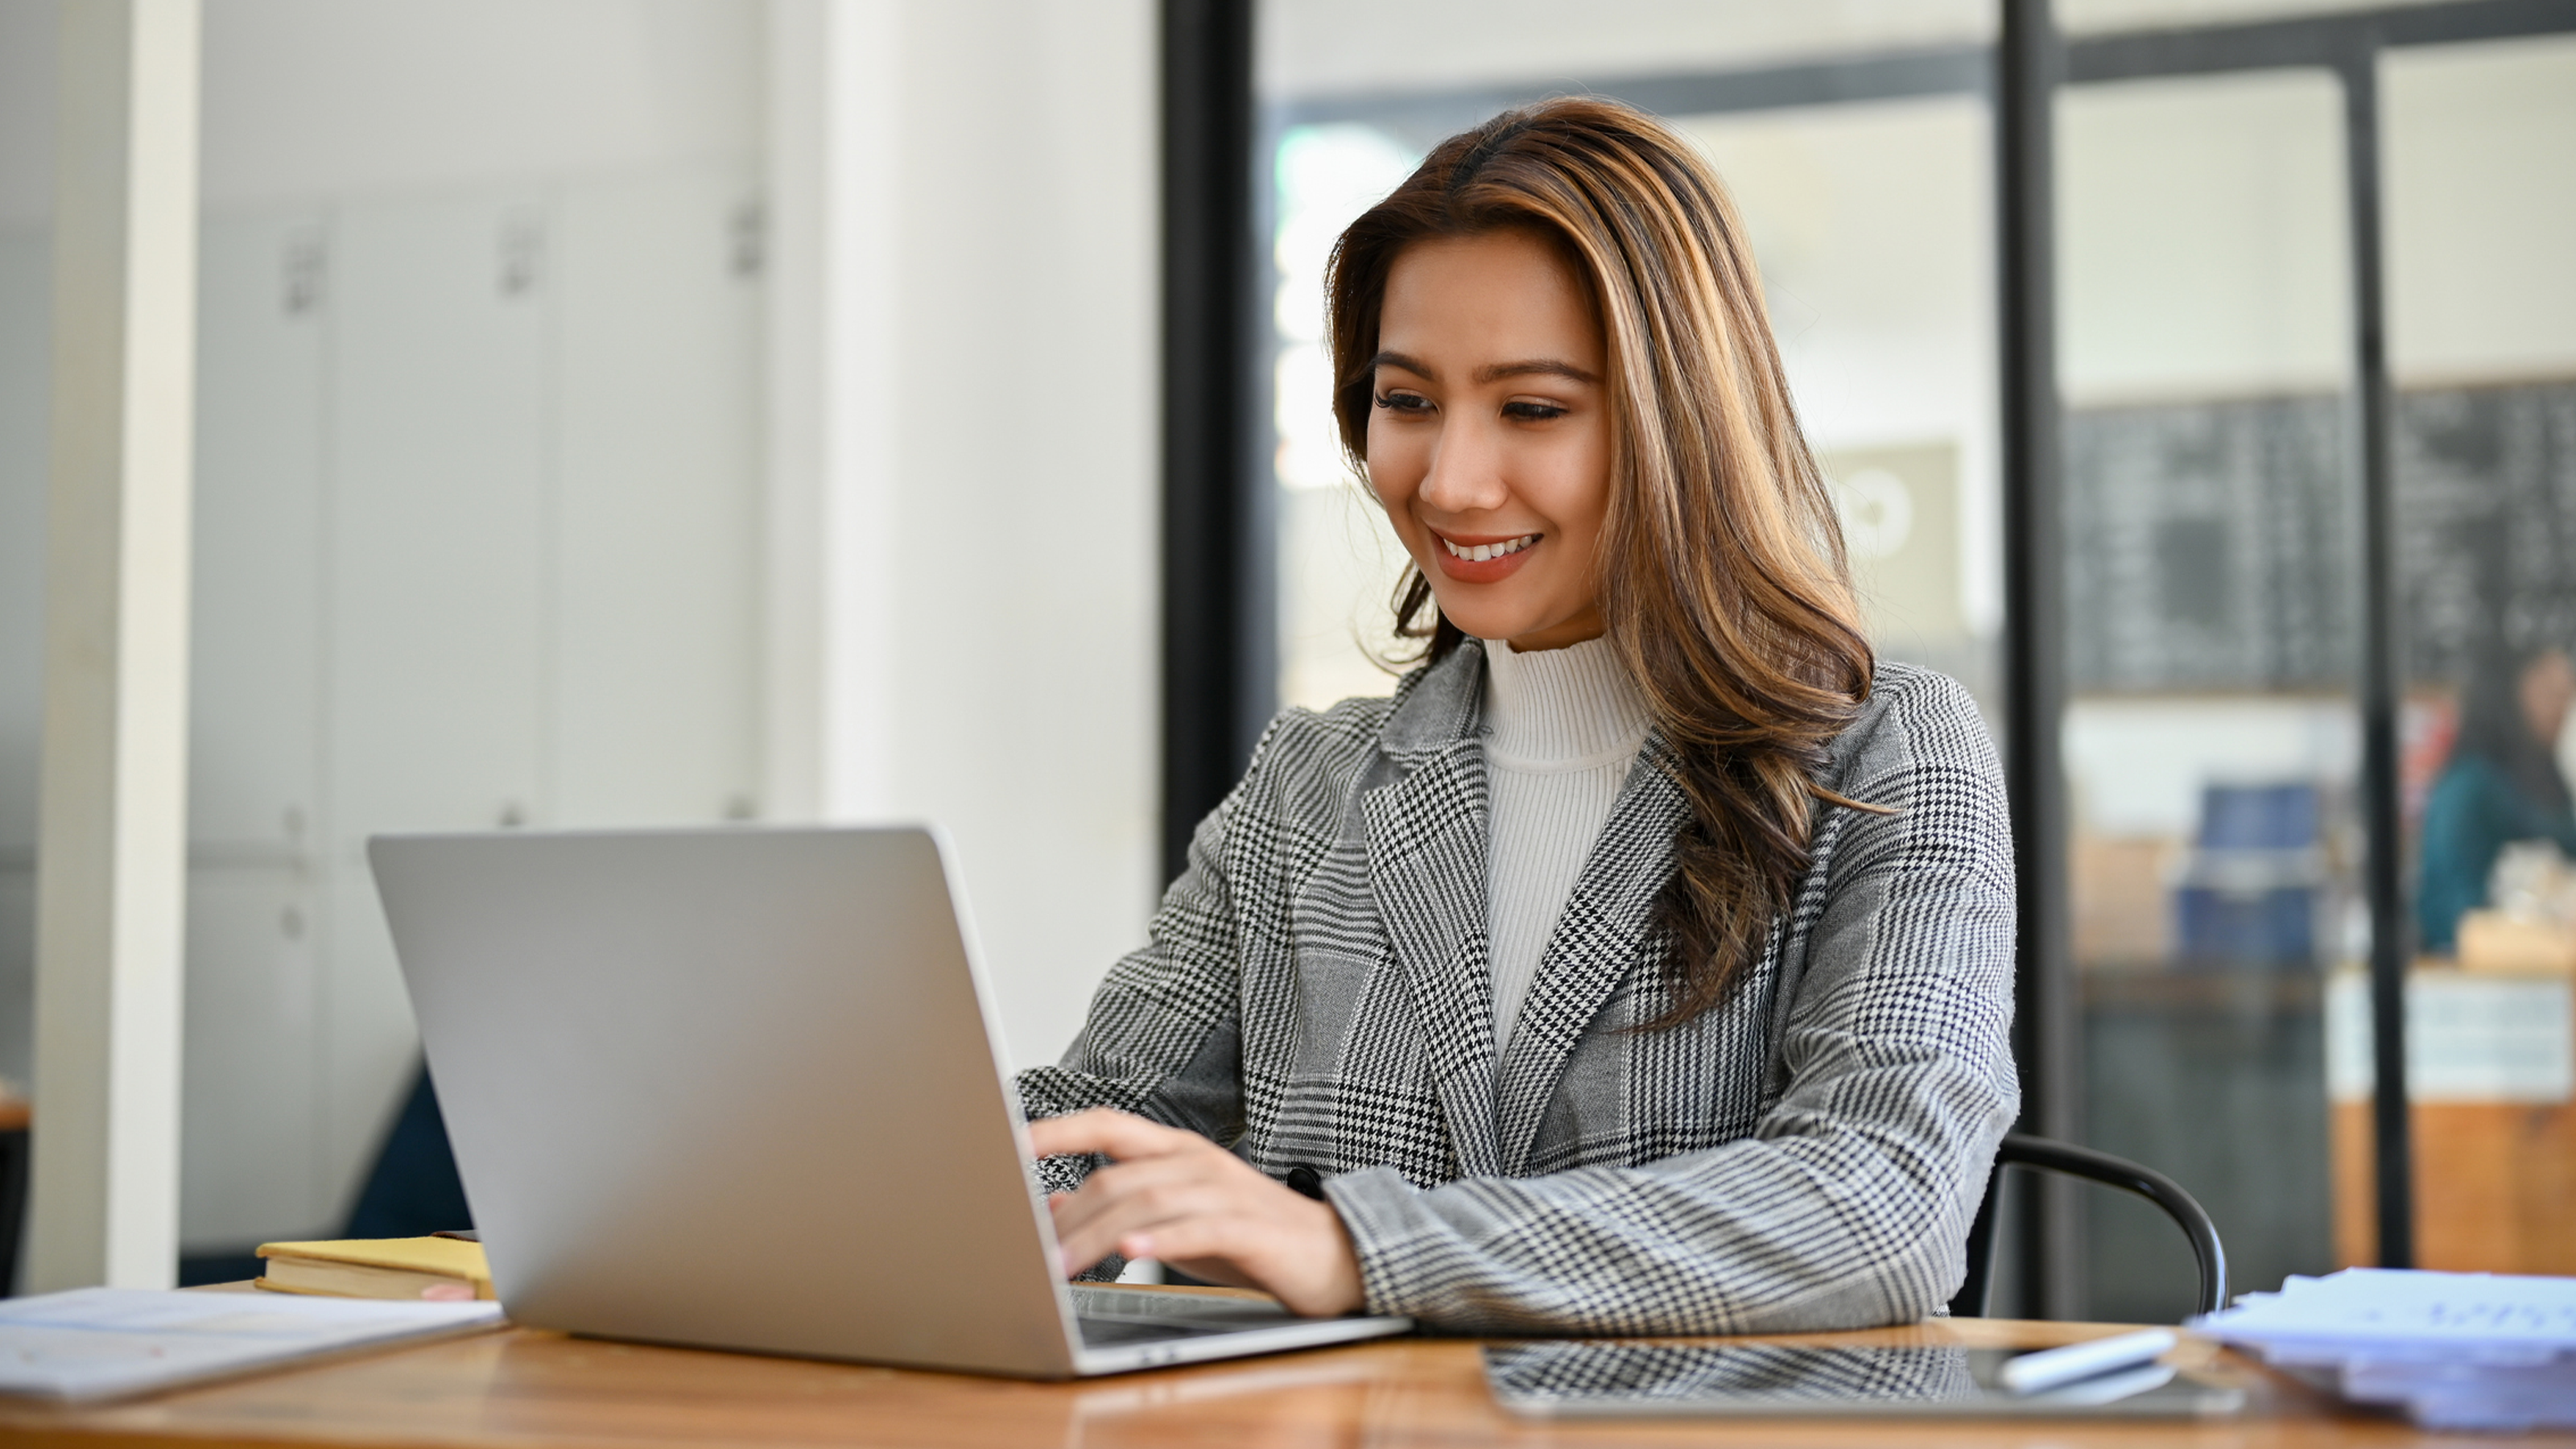 woman smiles while using laptop in an office